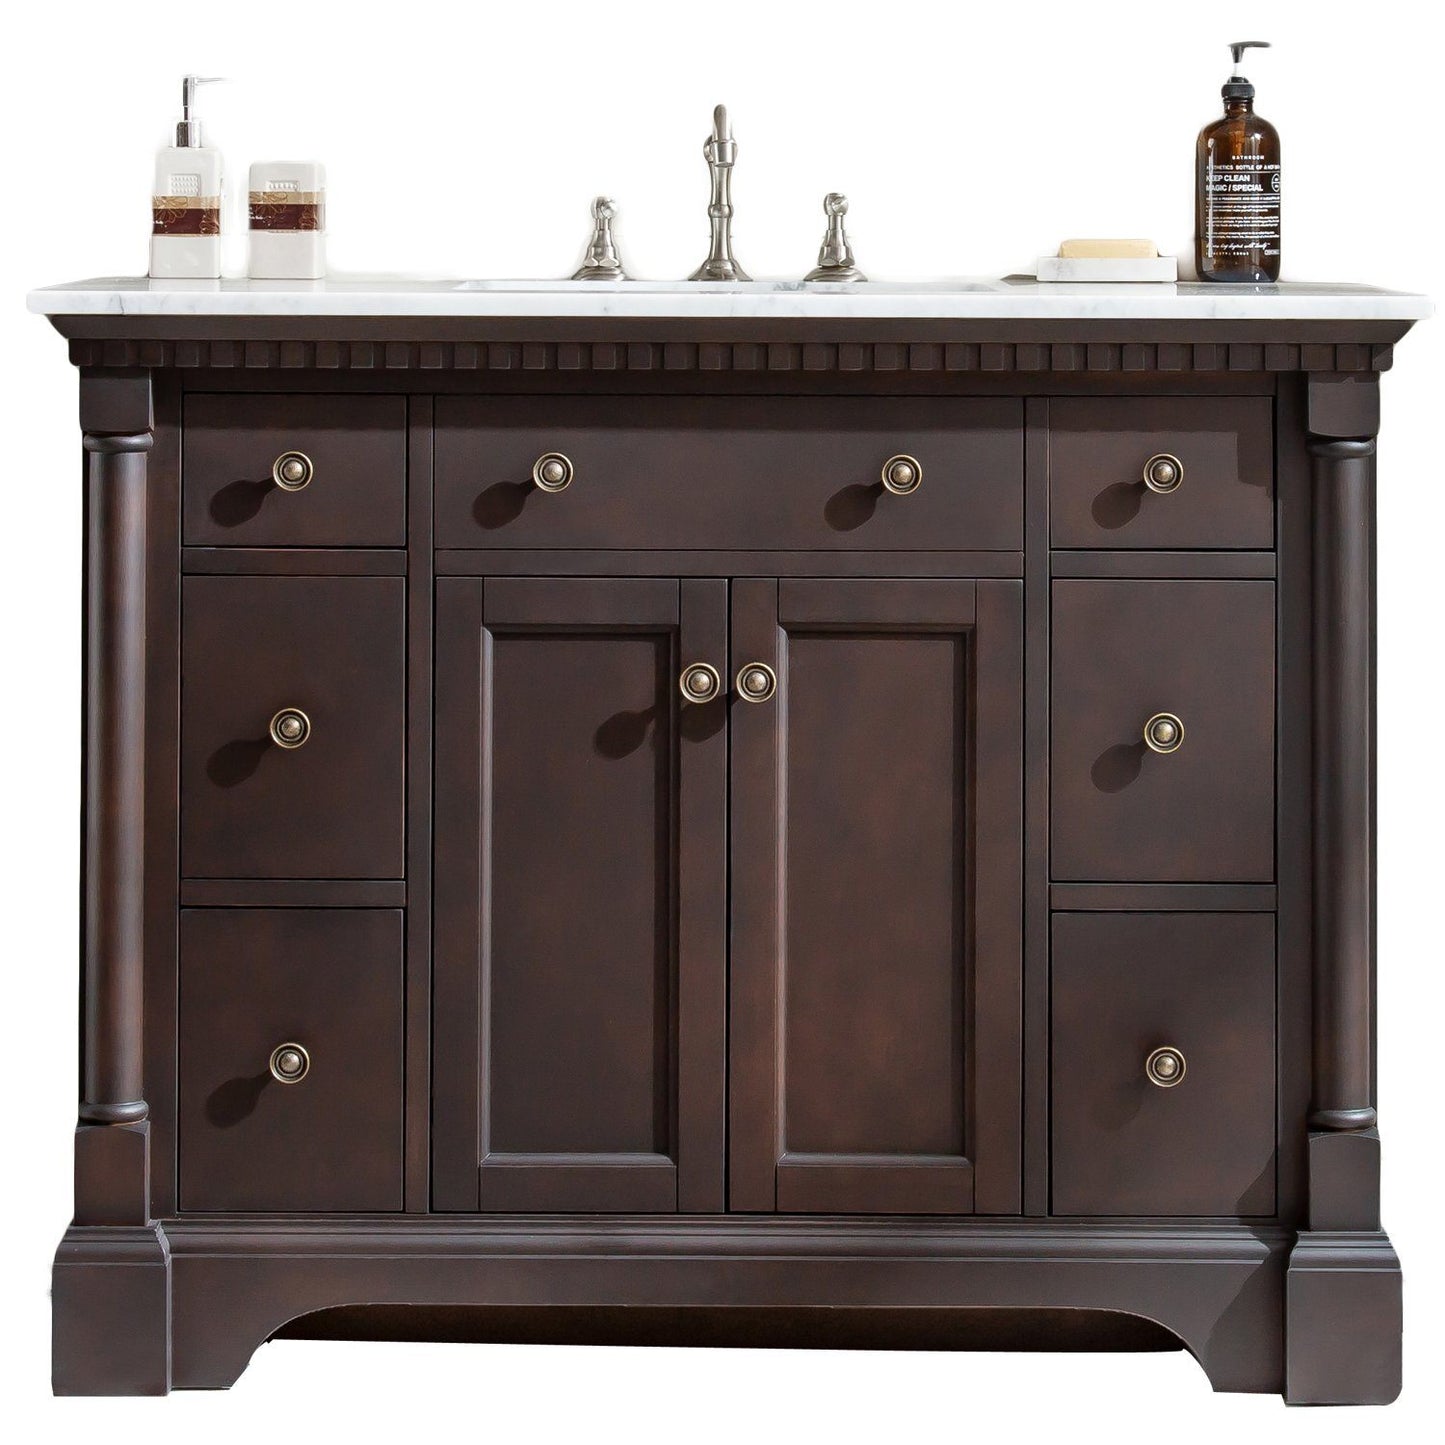 Eviva Preston 43 in. Aged Chocolate Bathroom Vanity with White Carrara Marble Countertop and Undermount Sink - Luxe Bathroom Vanities Luxury Bathroom Fixtures Bathroom Furniture